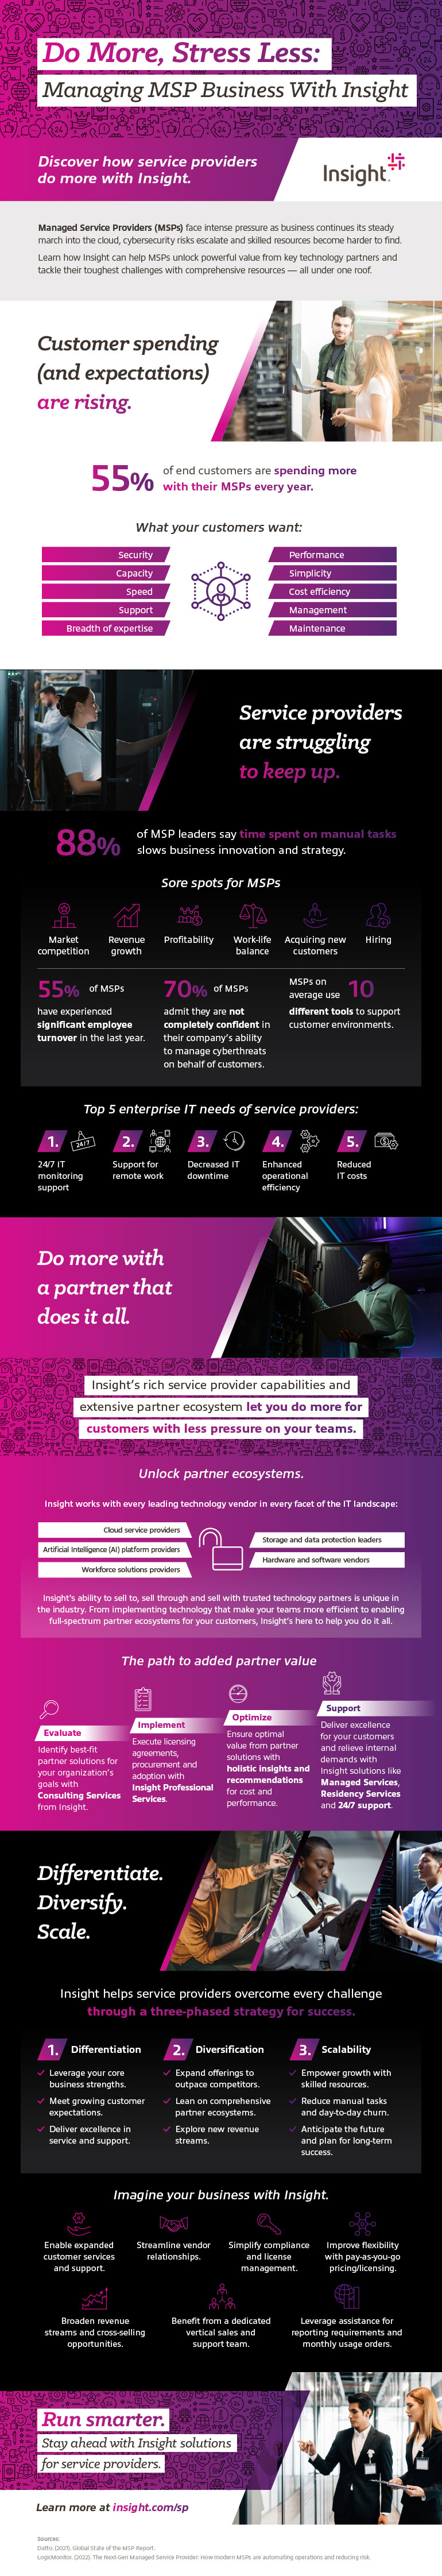 Service provider infographic available to download